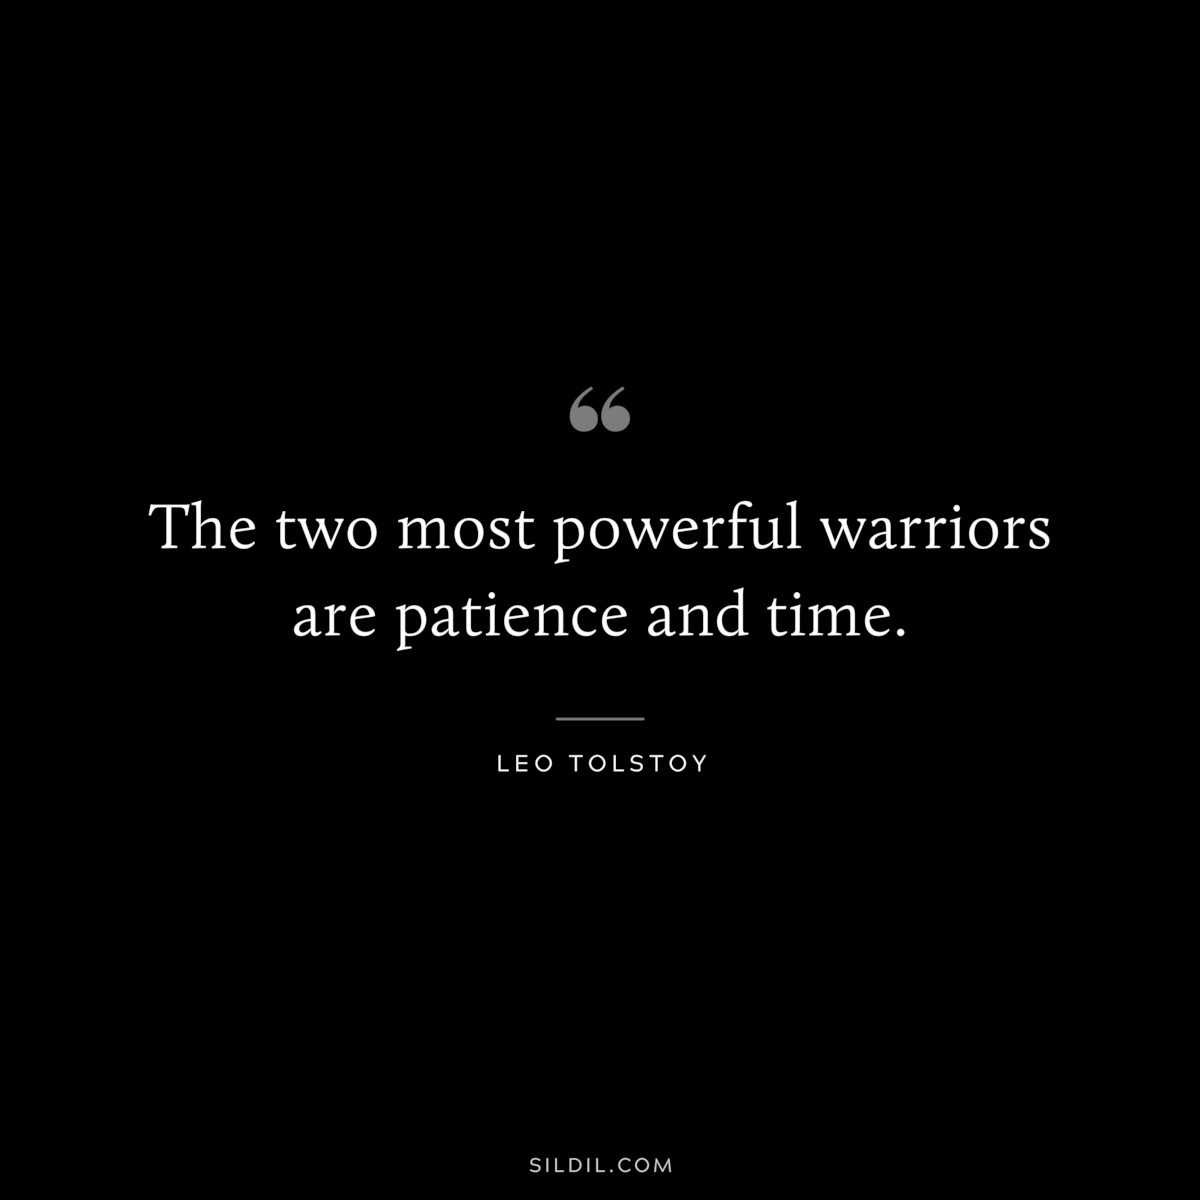 The two most powerful warriors are patience and time. ― Leo Tolstoy